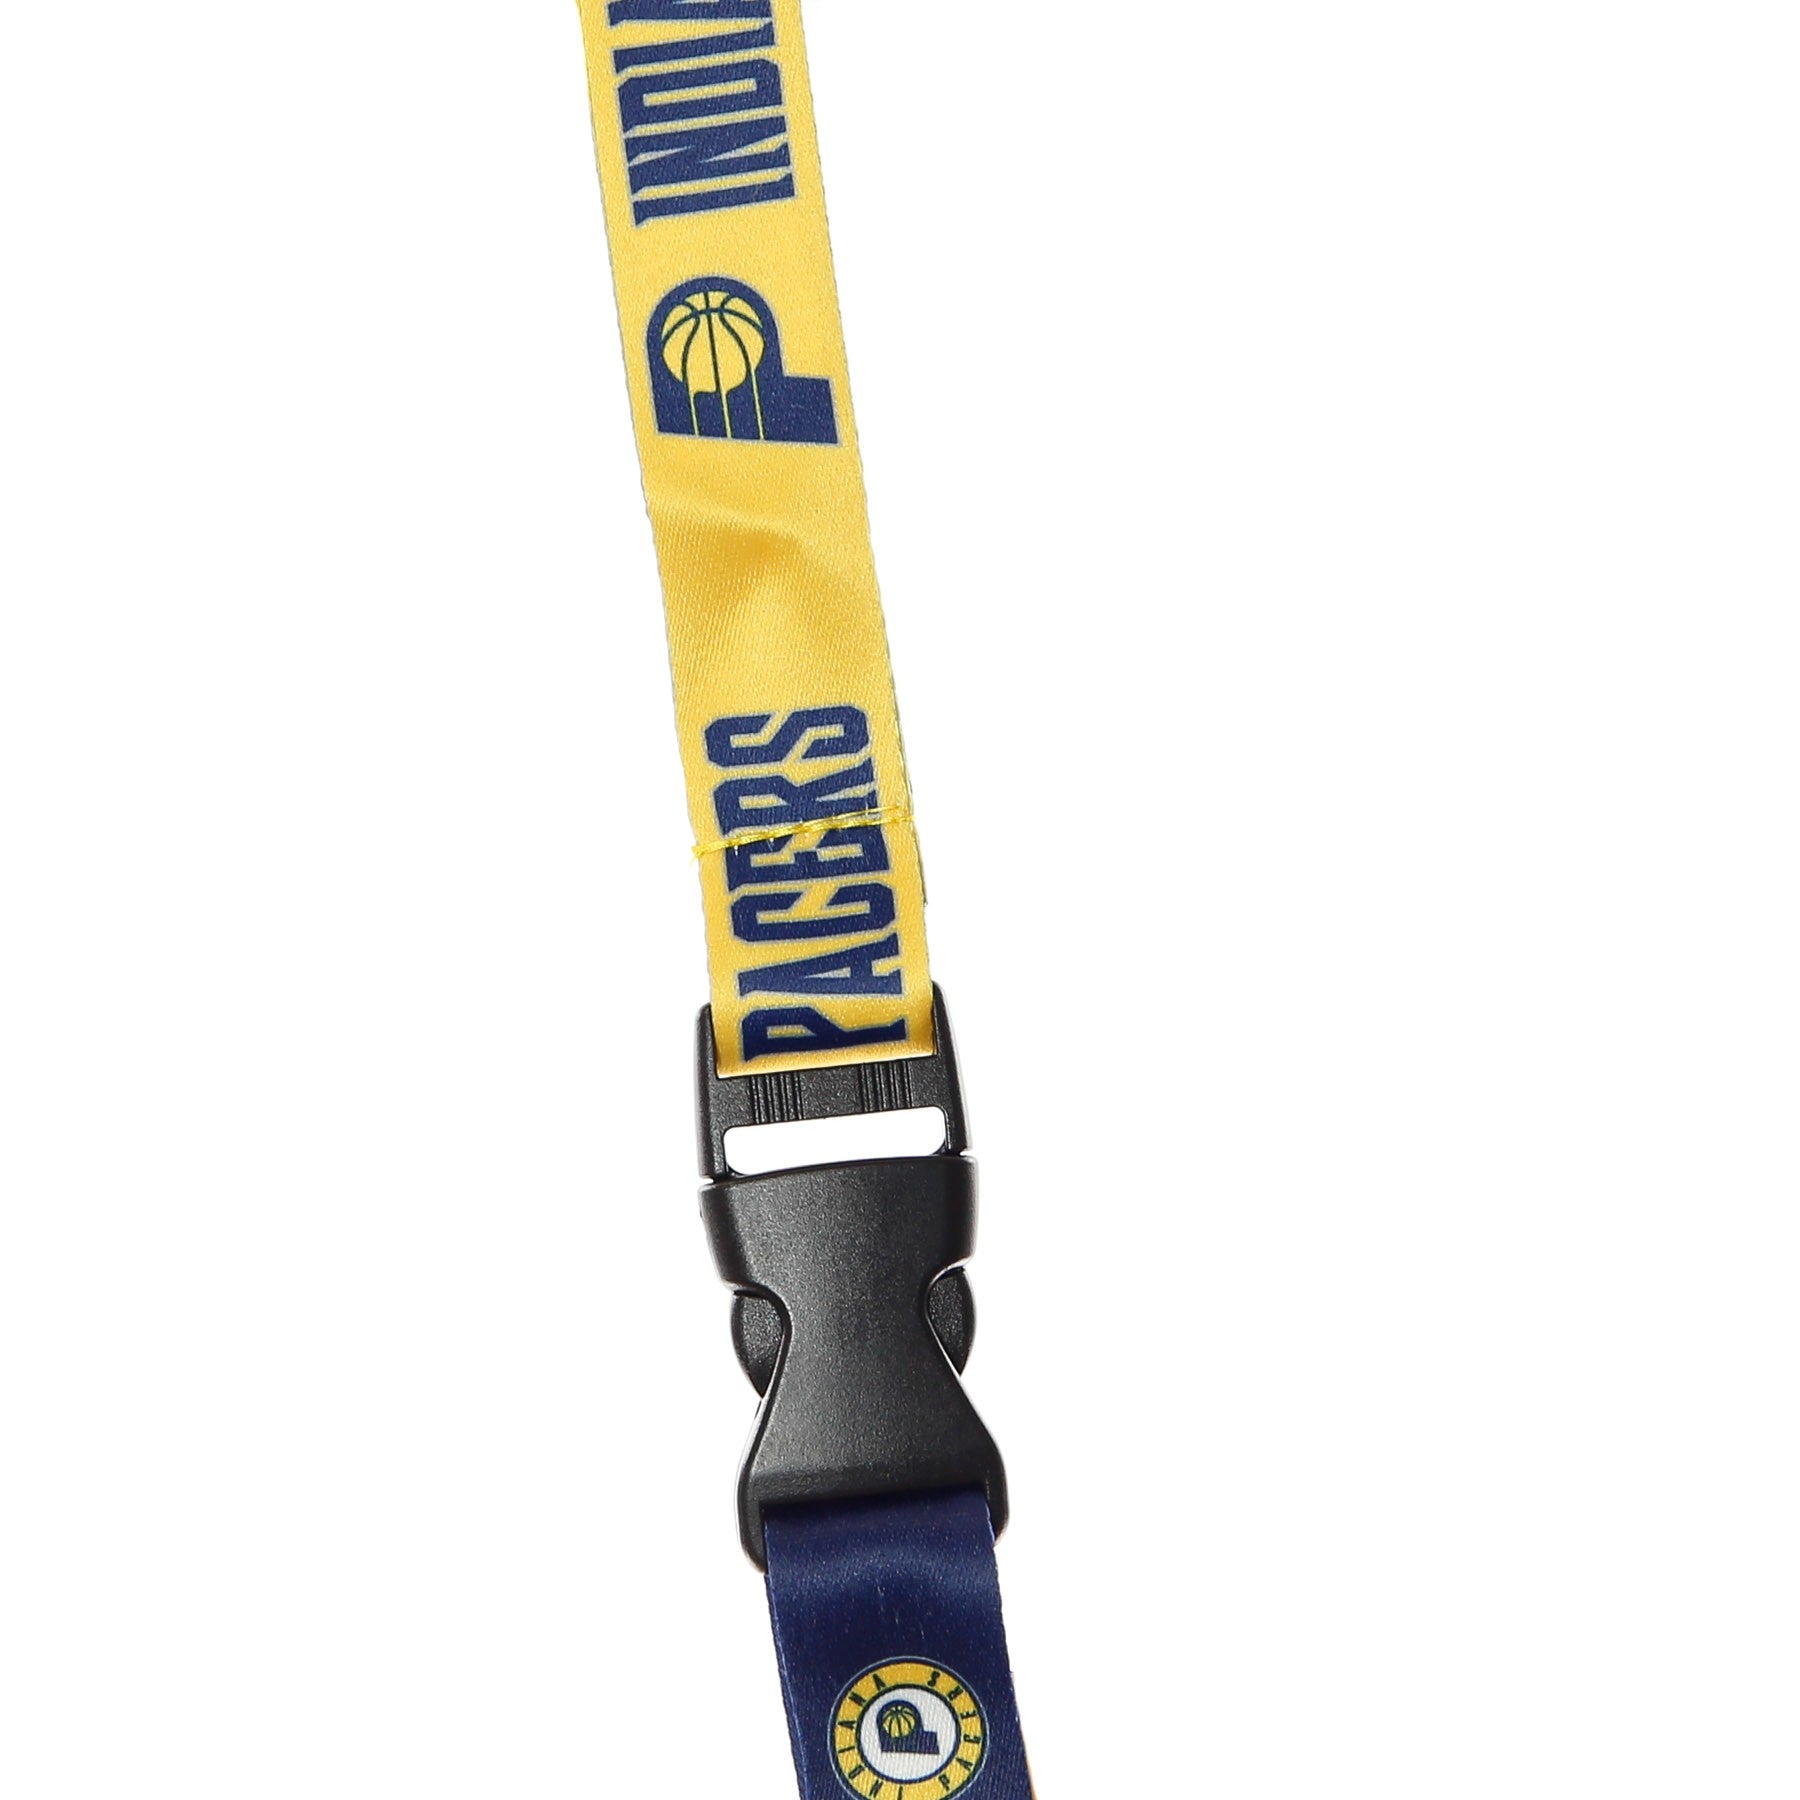 Unisex Nba Lanyard Keychain With Buckle Indpac Original Team Colors